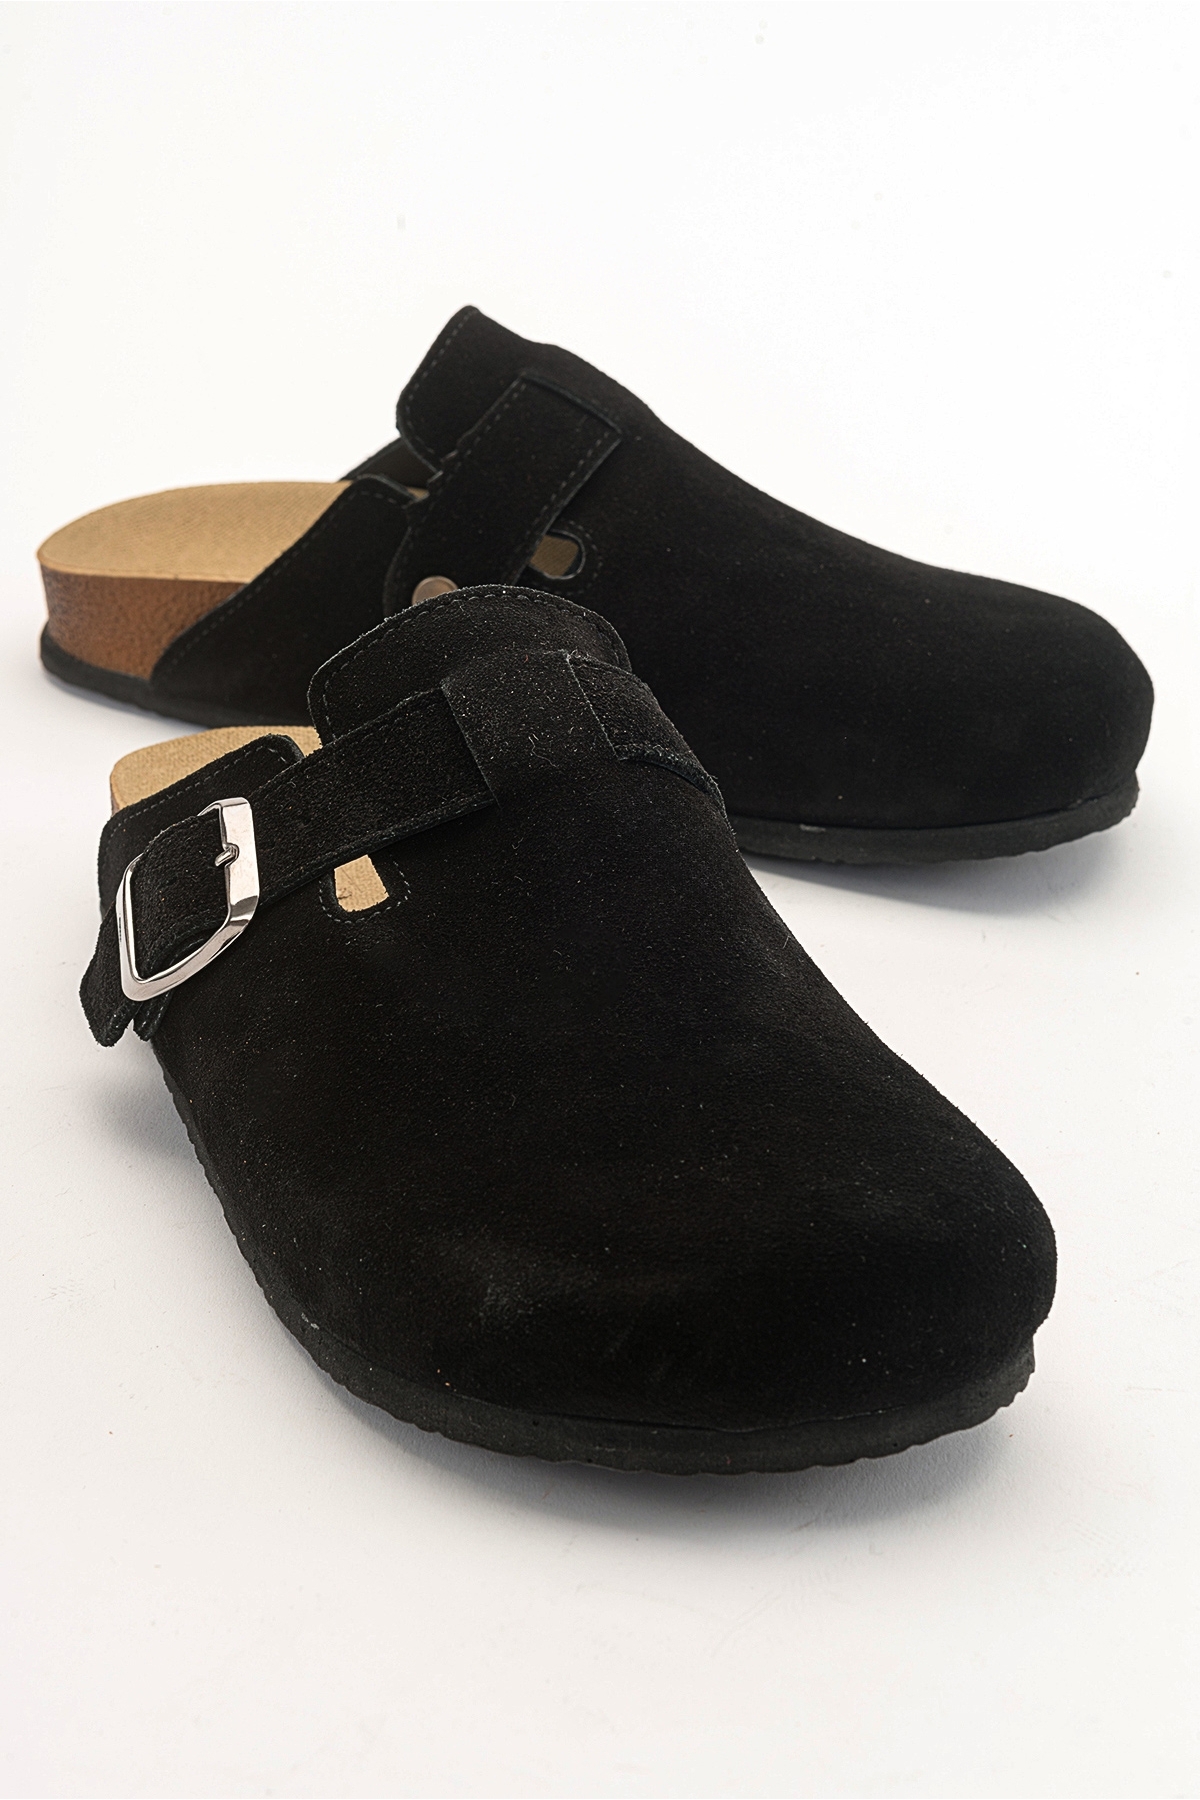 Levně LuviShoes GONS Black Women's Suede Leather Slippers